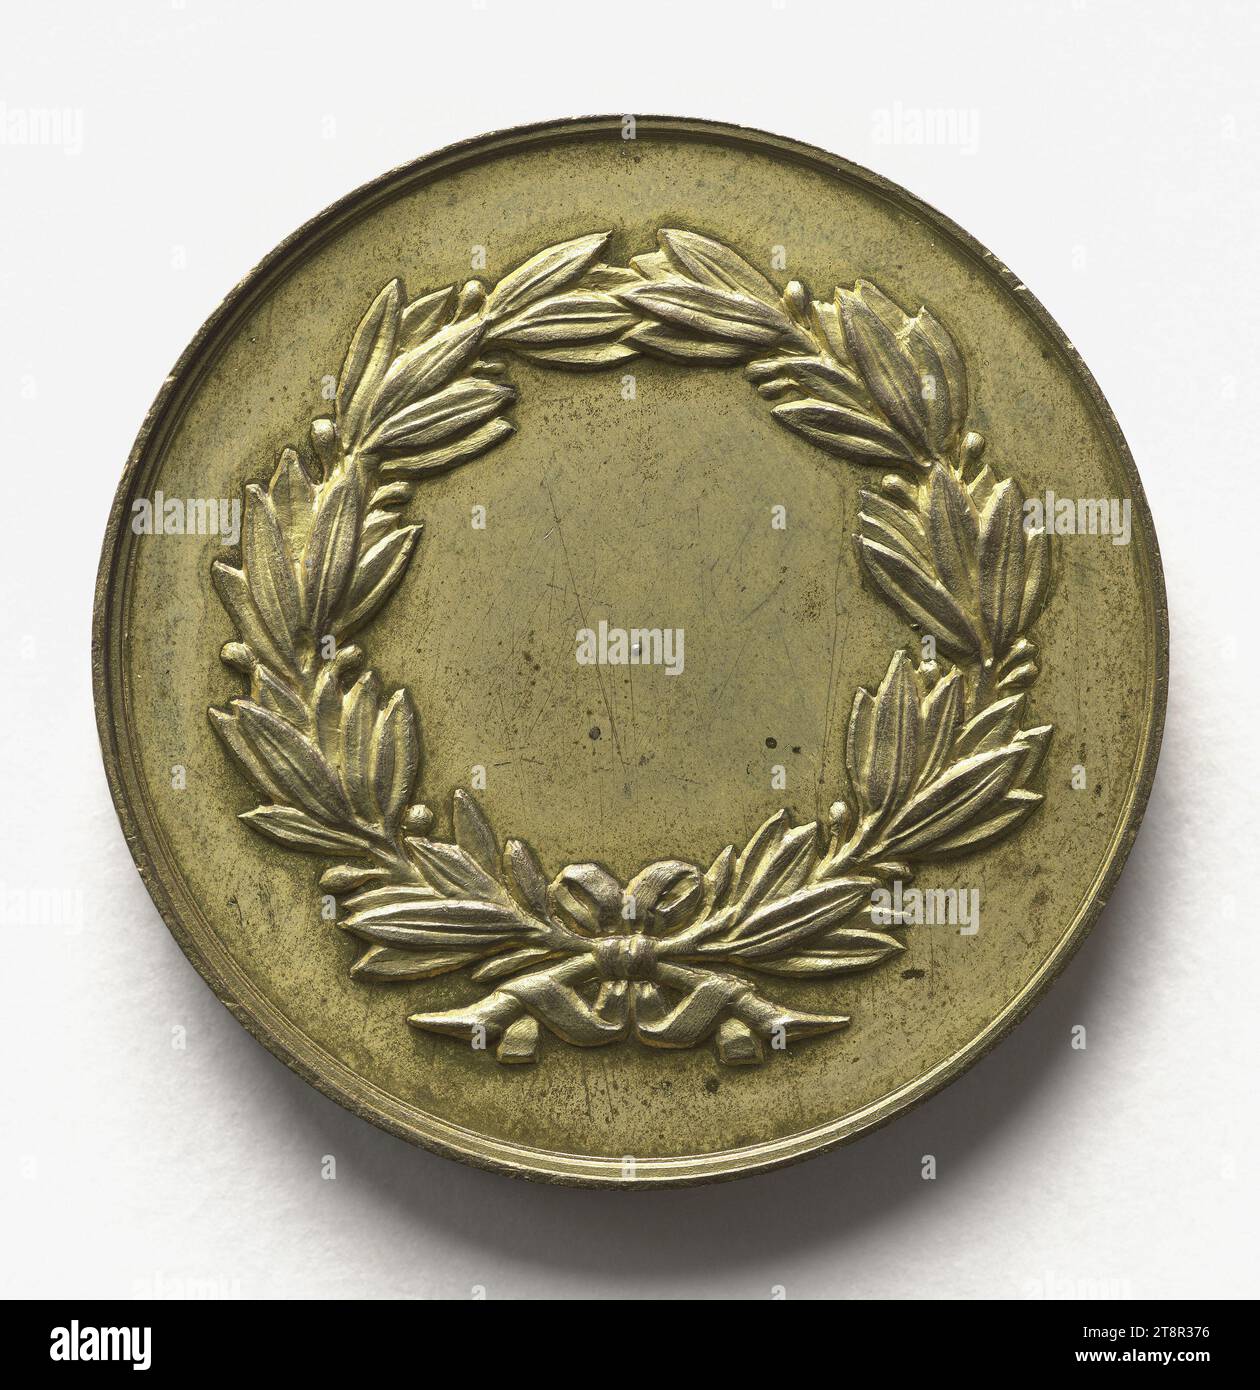 Musical contest of Lilas (Seine), 1872, Array, Numismatic, Medal, Copper, Gilt = gilding, Dimensions - Work: Diameter: 3 cm, Weight (type dimension): 13.38 g Stock Photo